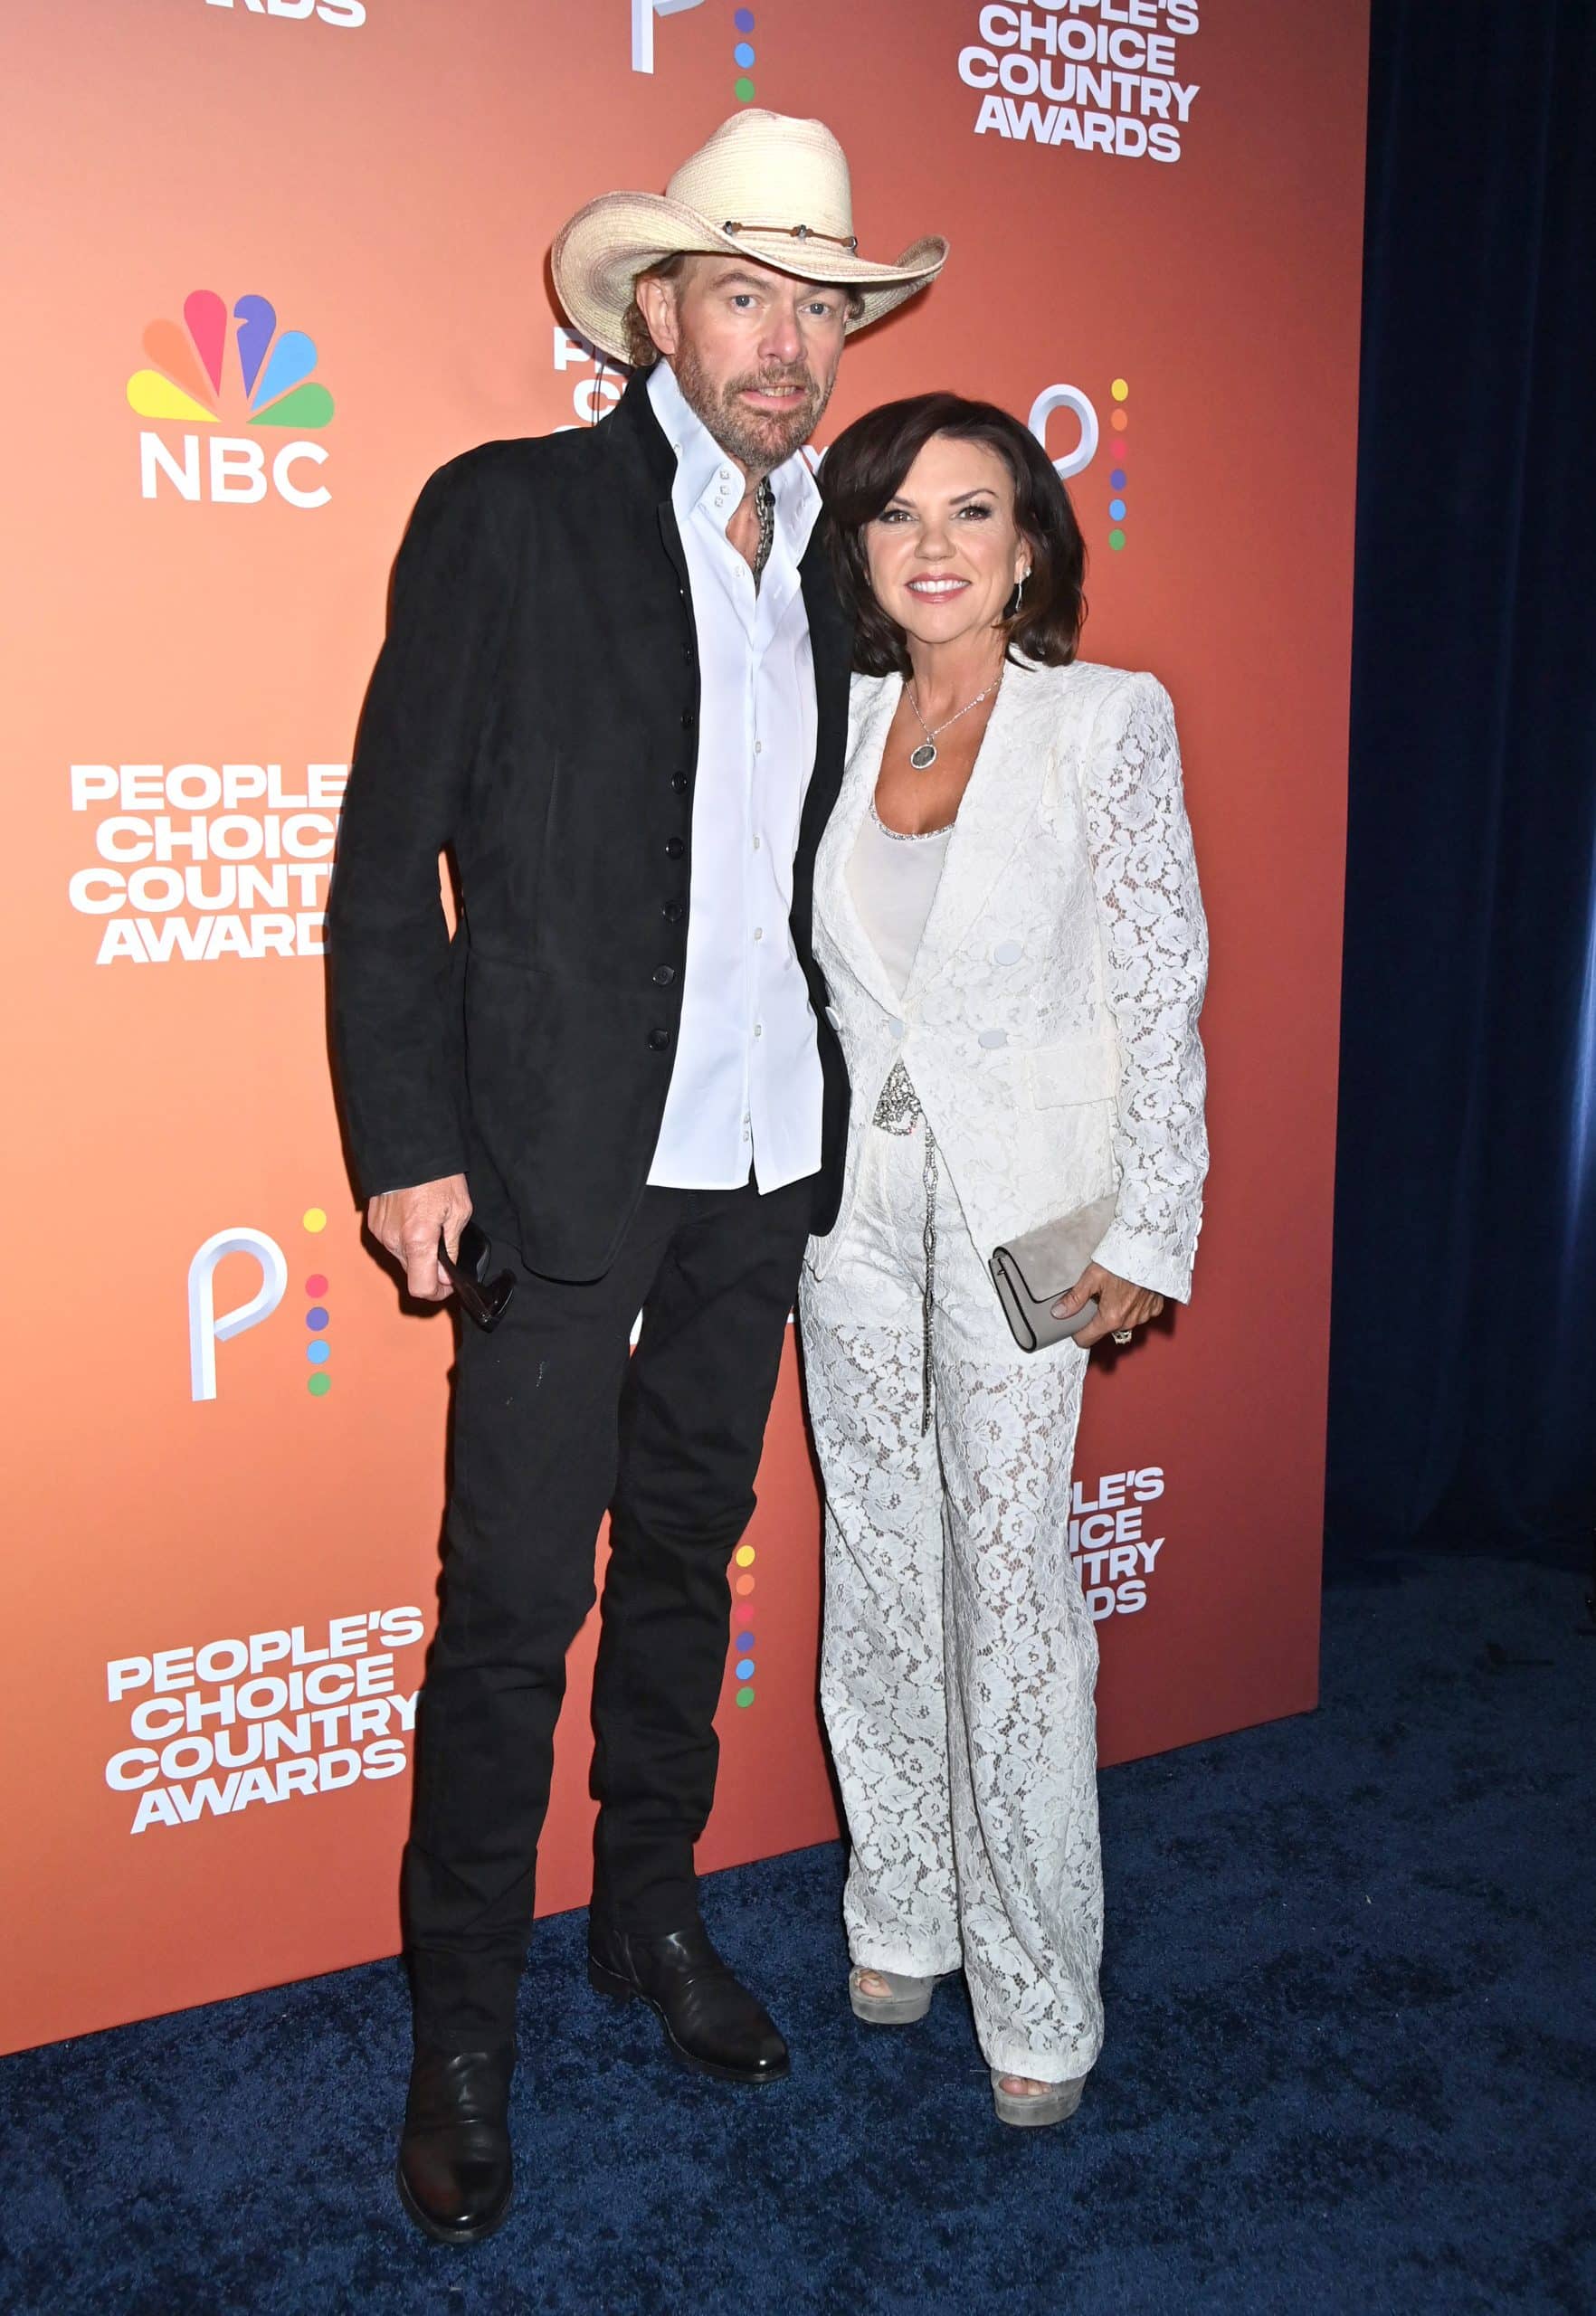 Toby Keith and his wife Tricia